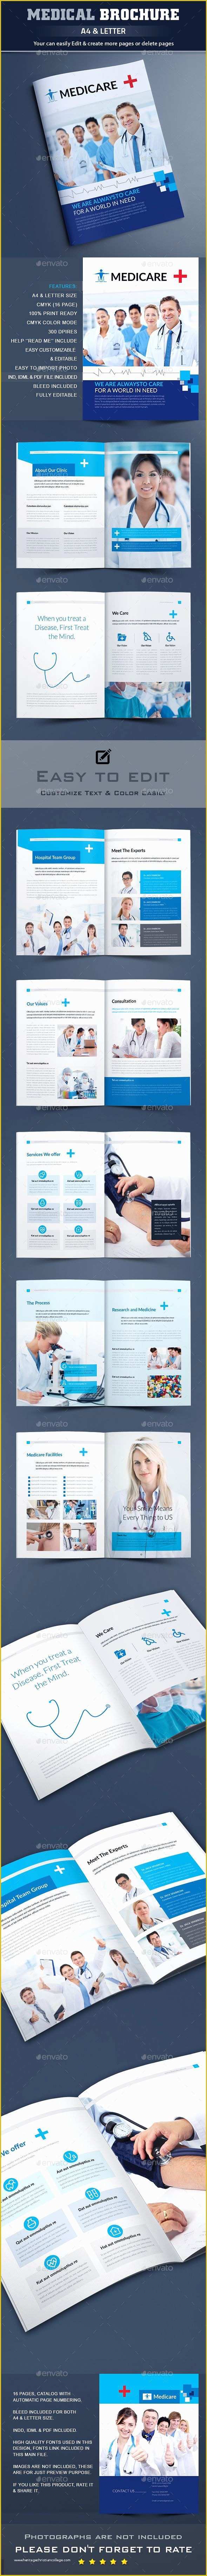 A4 Size Brochure Templates Psd Free Download Of Medical Brochure Template Psd – 16 Unique Pages A4 & Us